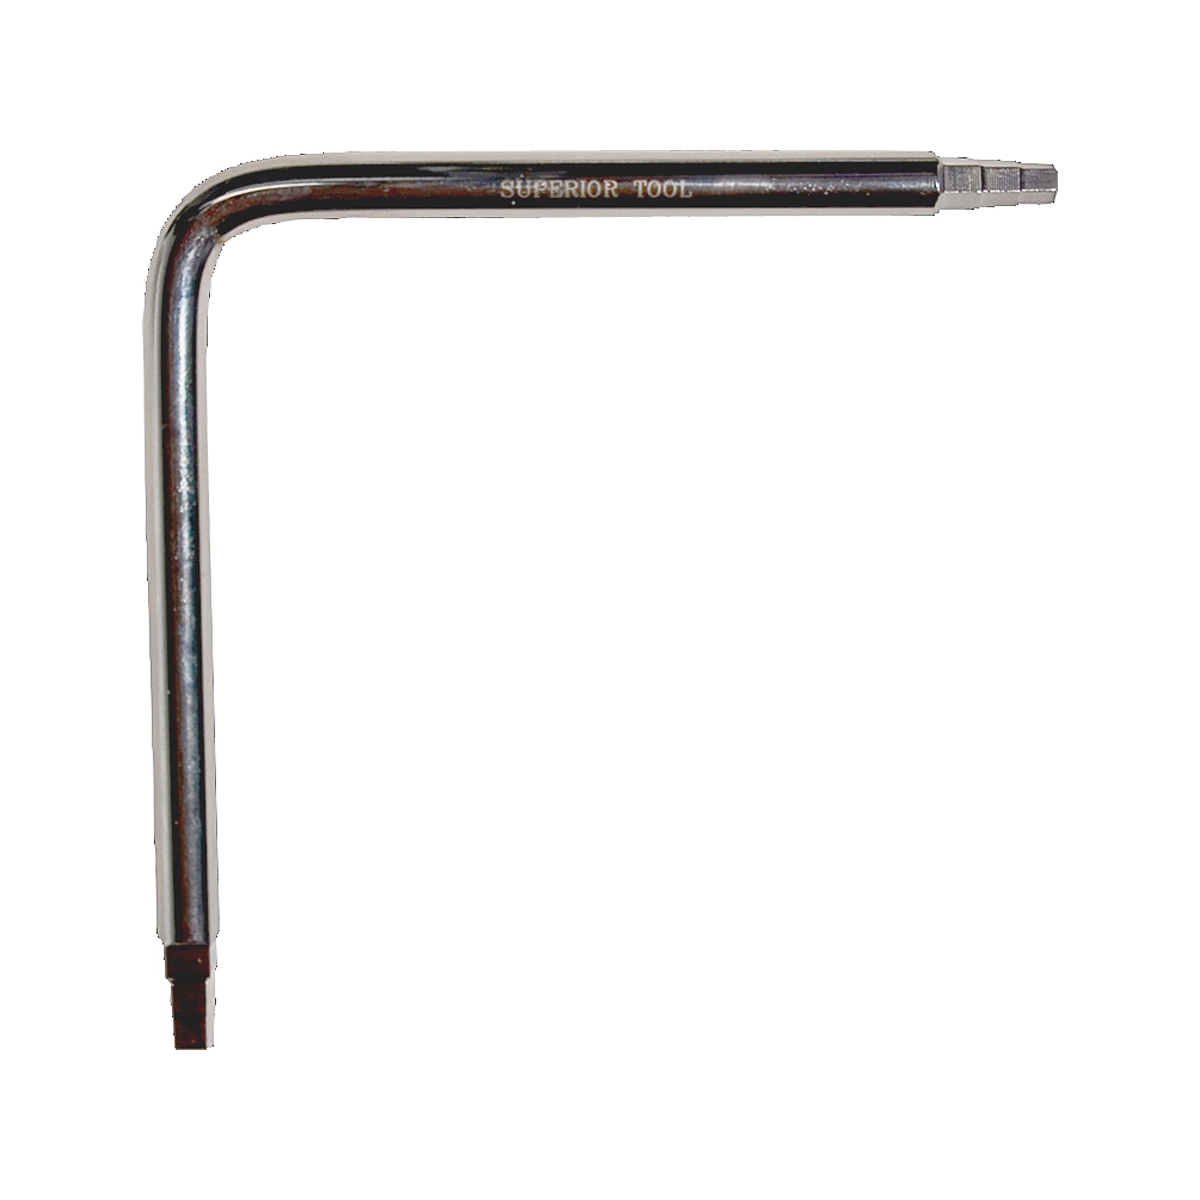 03860 Faucet Seat Wrench, 6 x 6 in Head, Steel, Nickel